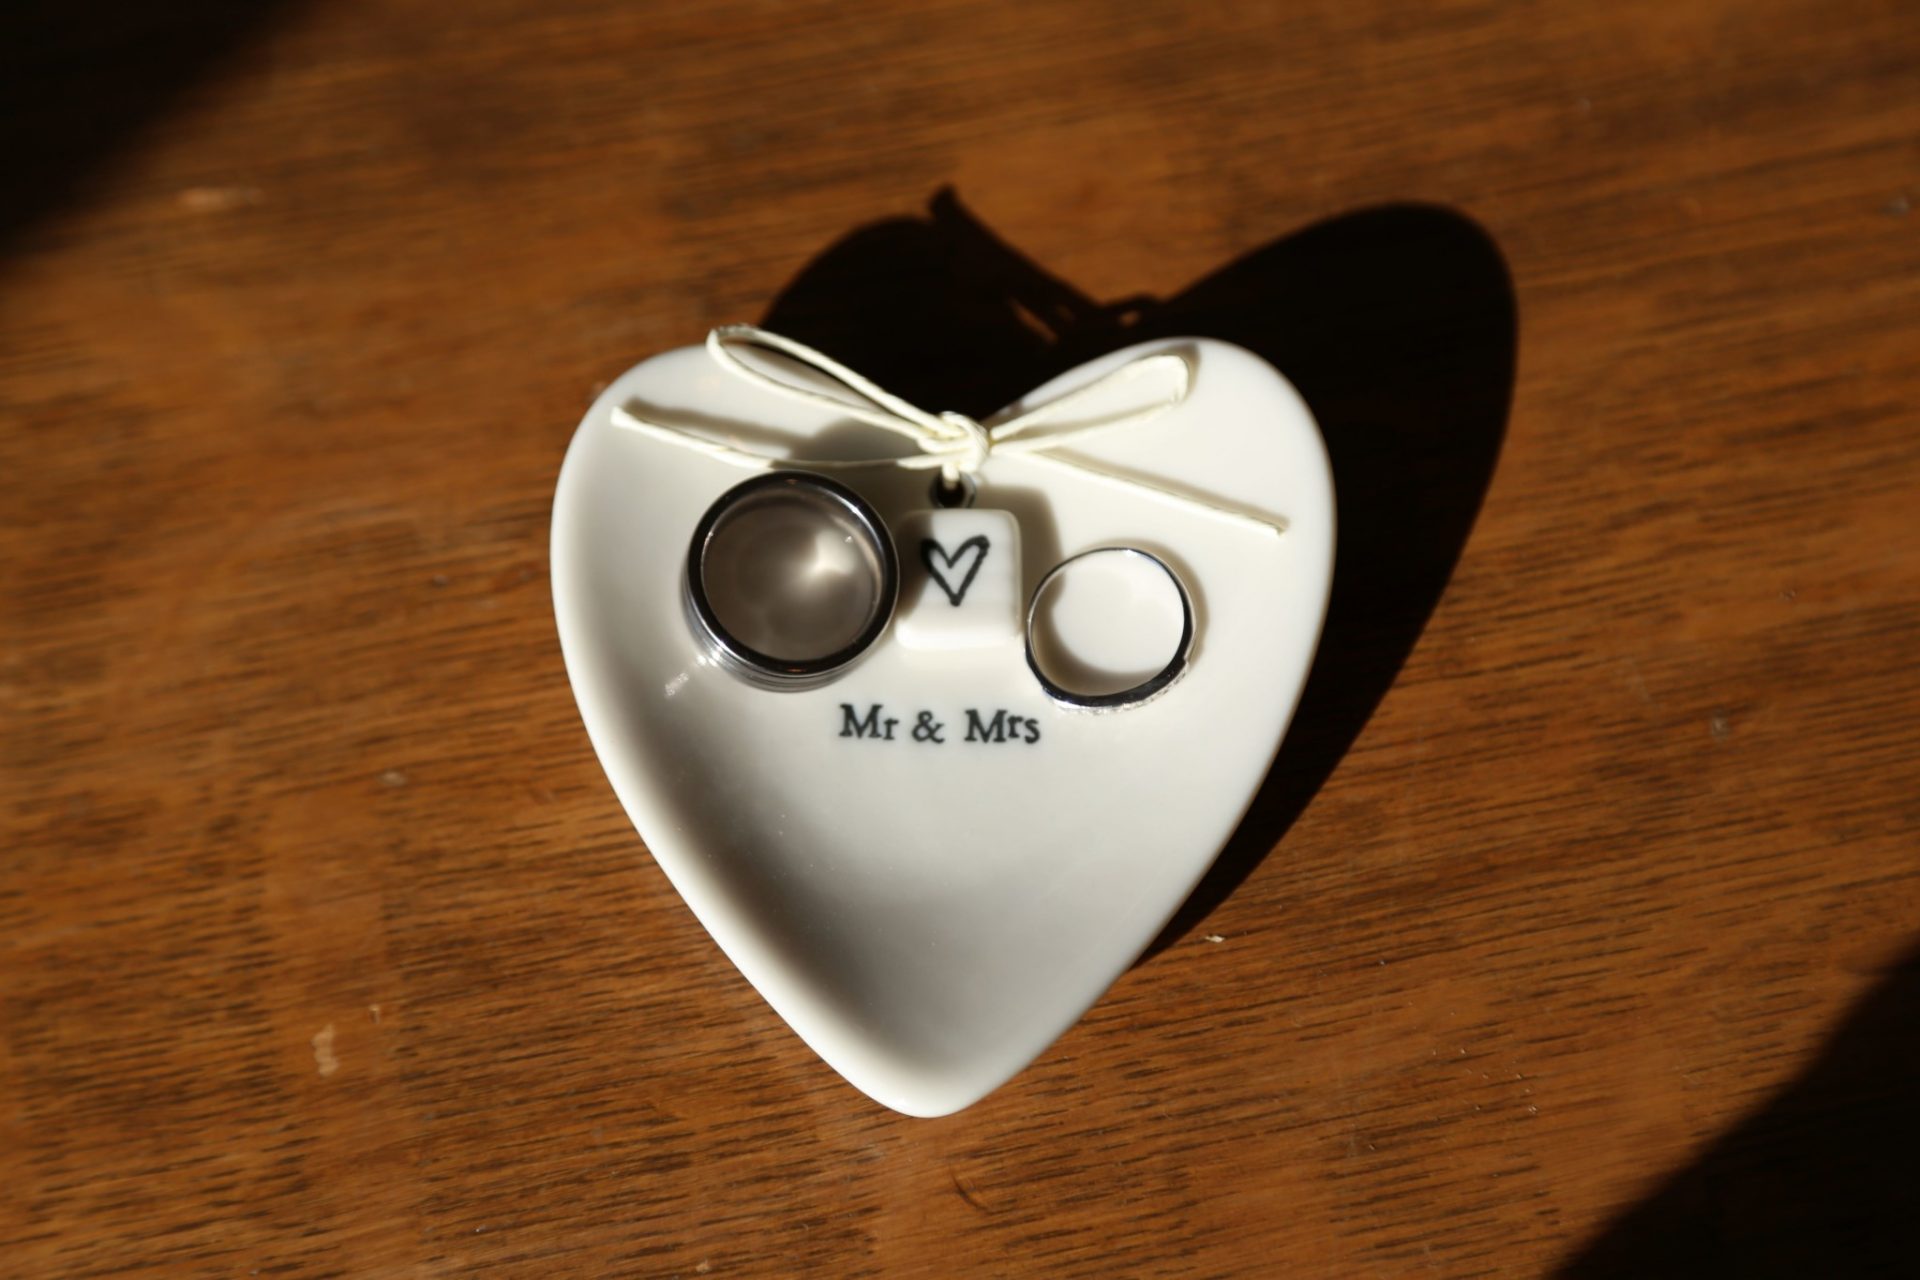 Heart shaped dish to hold rings.